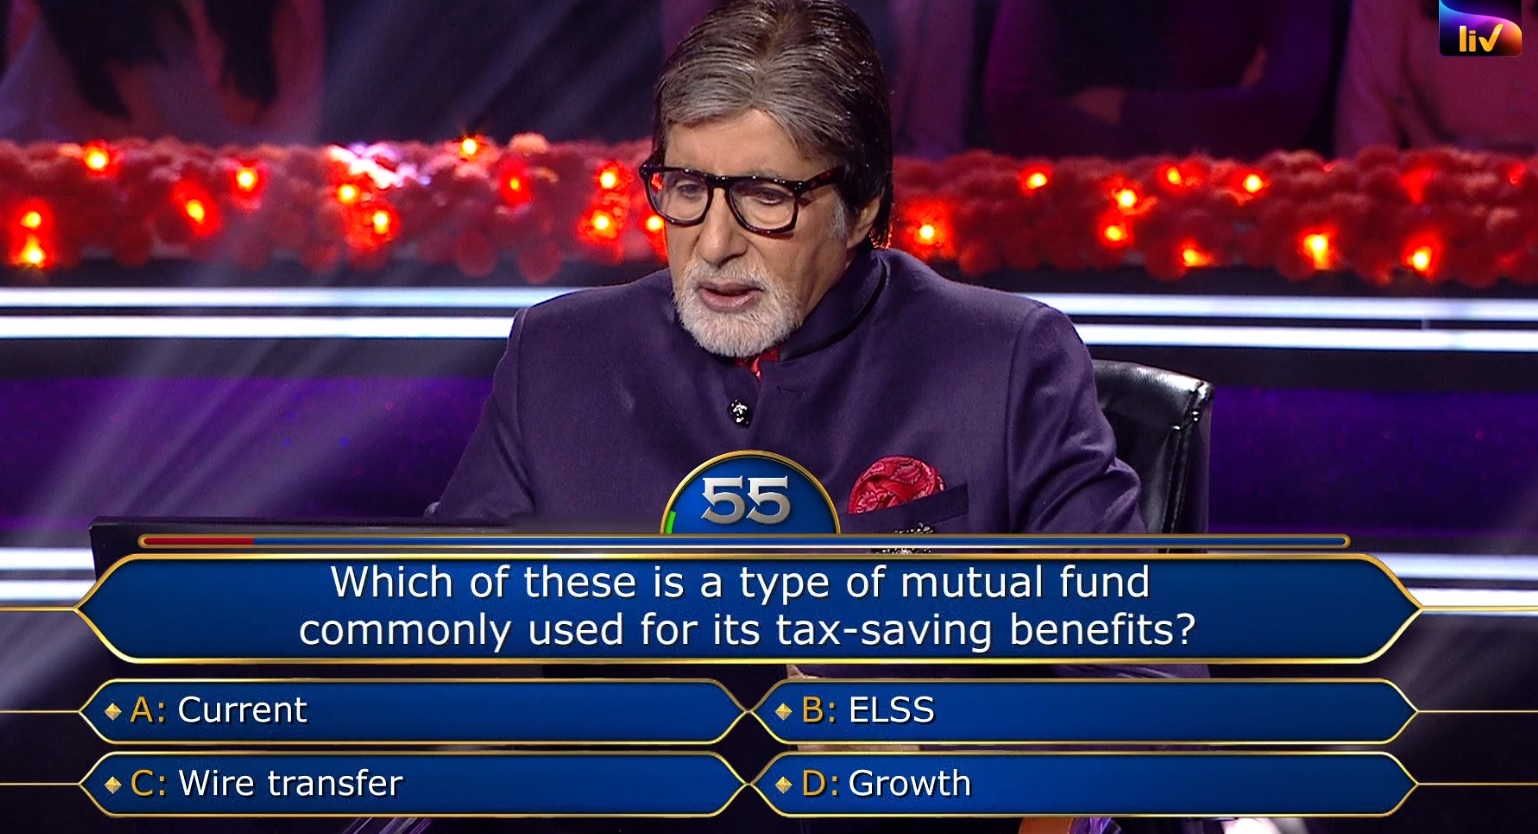 Ques : Which of these is a type of mutual fund commonly used for its tax-saving benefits?